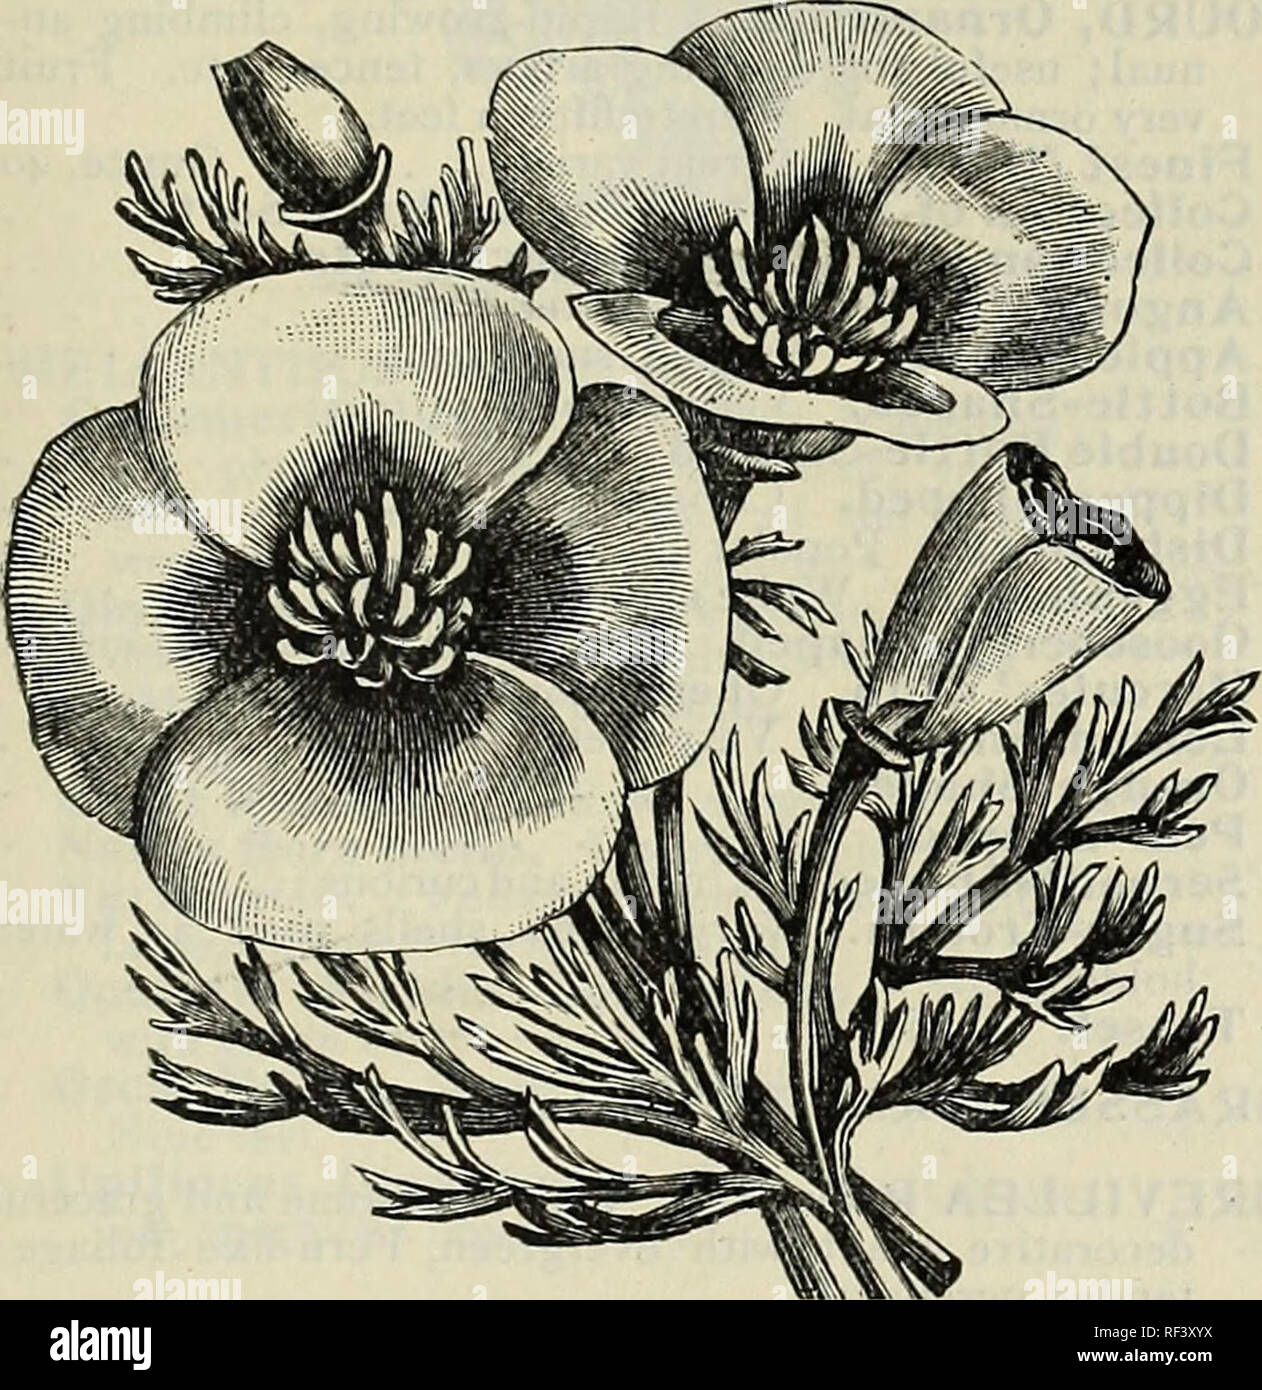 . Reliable seeds : plants, bulbs, fertilizers, tools, etc.. Nursery stock Massachusetts Boston Catalogs; Flowers Seeds Catalogs; Plants Ornamental Catalogs; Agriculural implements Catalogs. R. &amp; /. FARQUHAR &amp;» CO.'S SEED CATALOGUE. 39 No. 3535 354o 3545 355o 3555 3560 3565 357o 3575 358o 3585 359o Pkt. ERIGERON Aurantiacus. Beautiful, bright orange, hardy border perennial. One foot . .10 Glabellus. Purple, yellow disk. Three-fourths foot .05 Erinus Albus. Pure white; hardy Alpine plant. One-half foot 15 Carmineus. Carmine; very free blooming 15 ERITRICHIUM Nothofulvum. Handsome hardy a Stock Photo